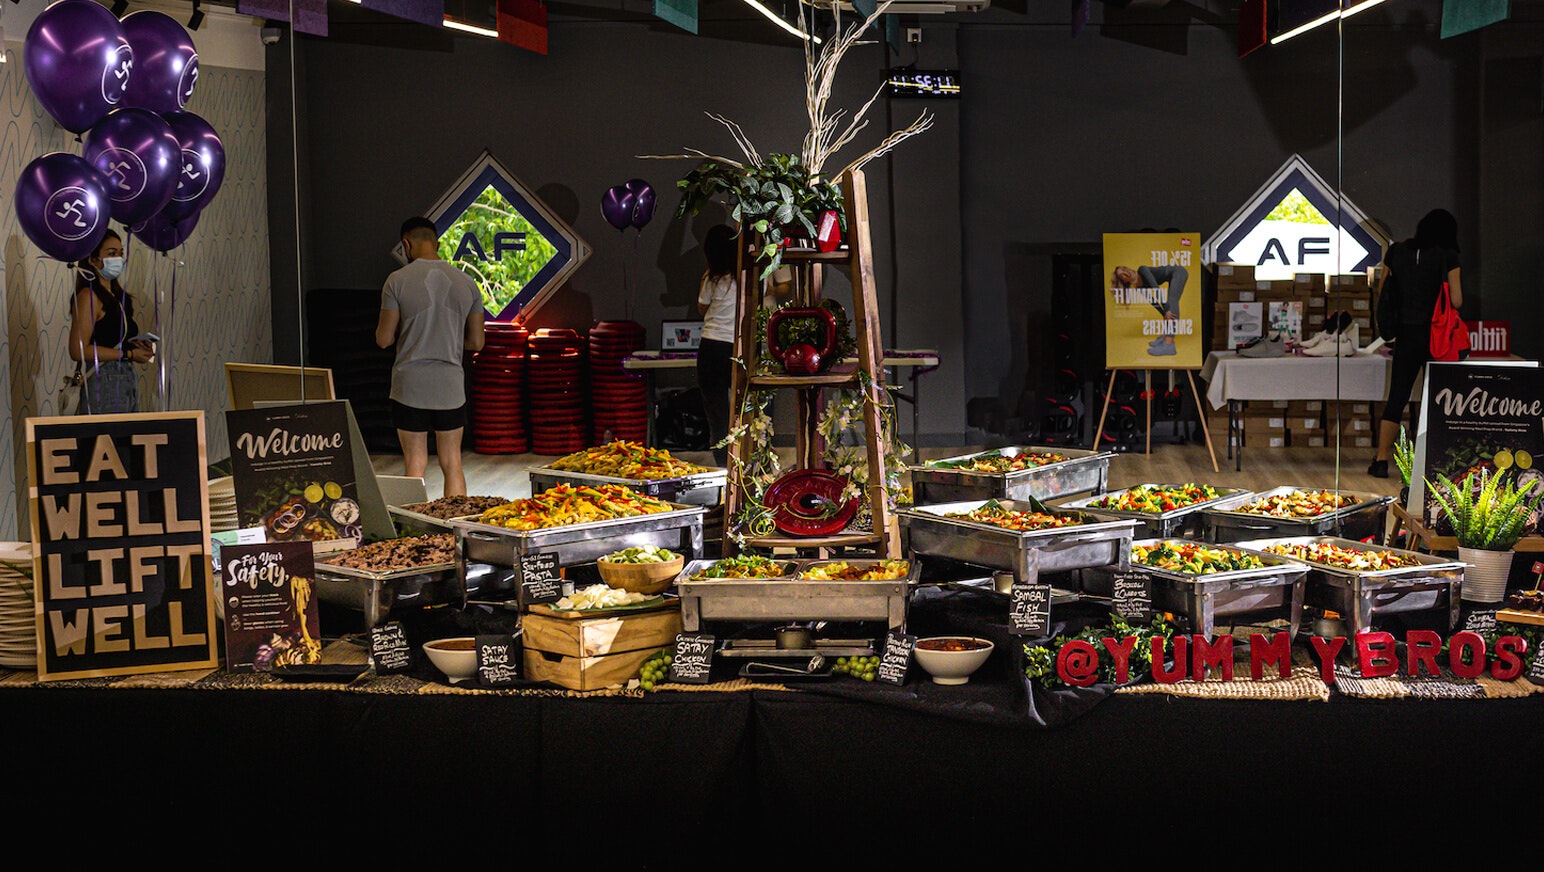 Feast your eyes on Yummy Bros' tantalizing assortment of delicious, healthy eats, showcasing a vibrant variety of visually appealing dishes and mouthwatering presentations!